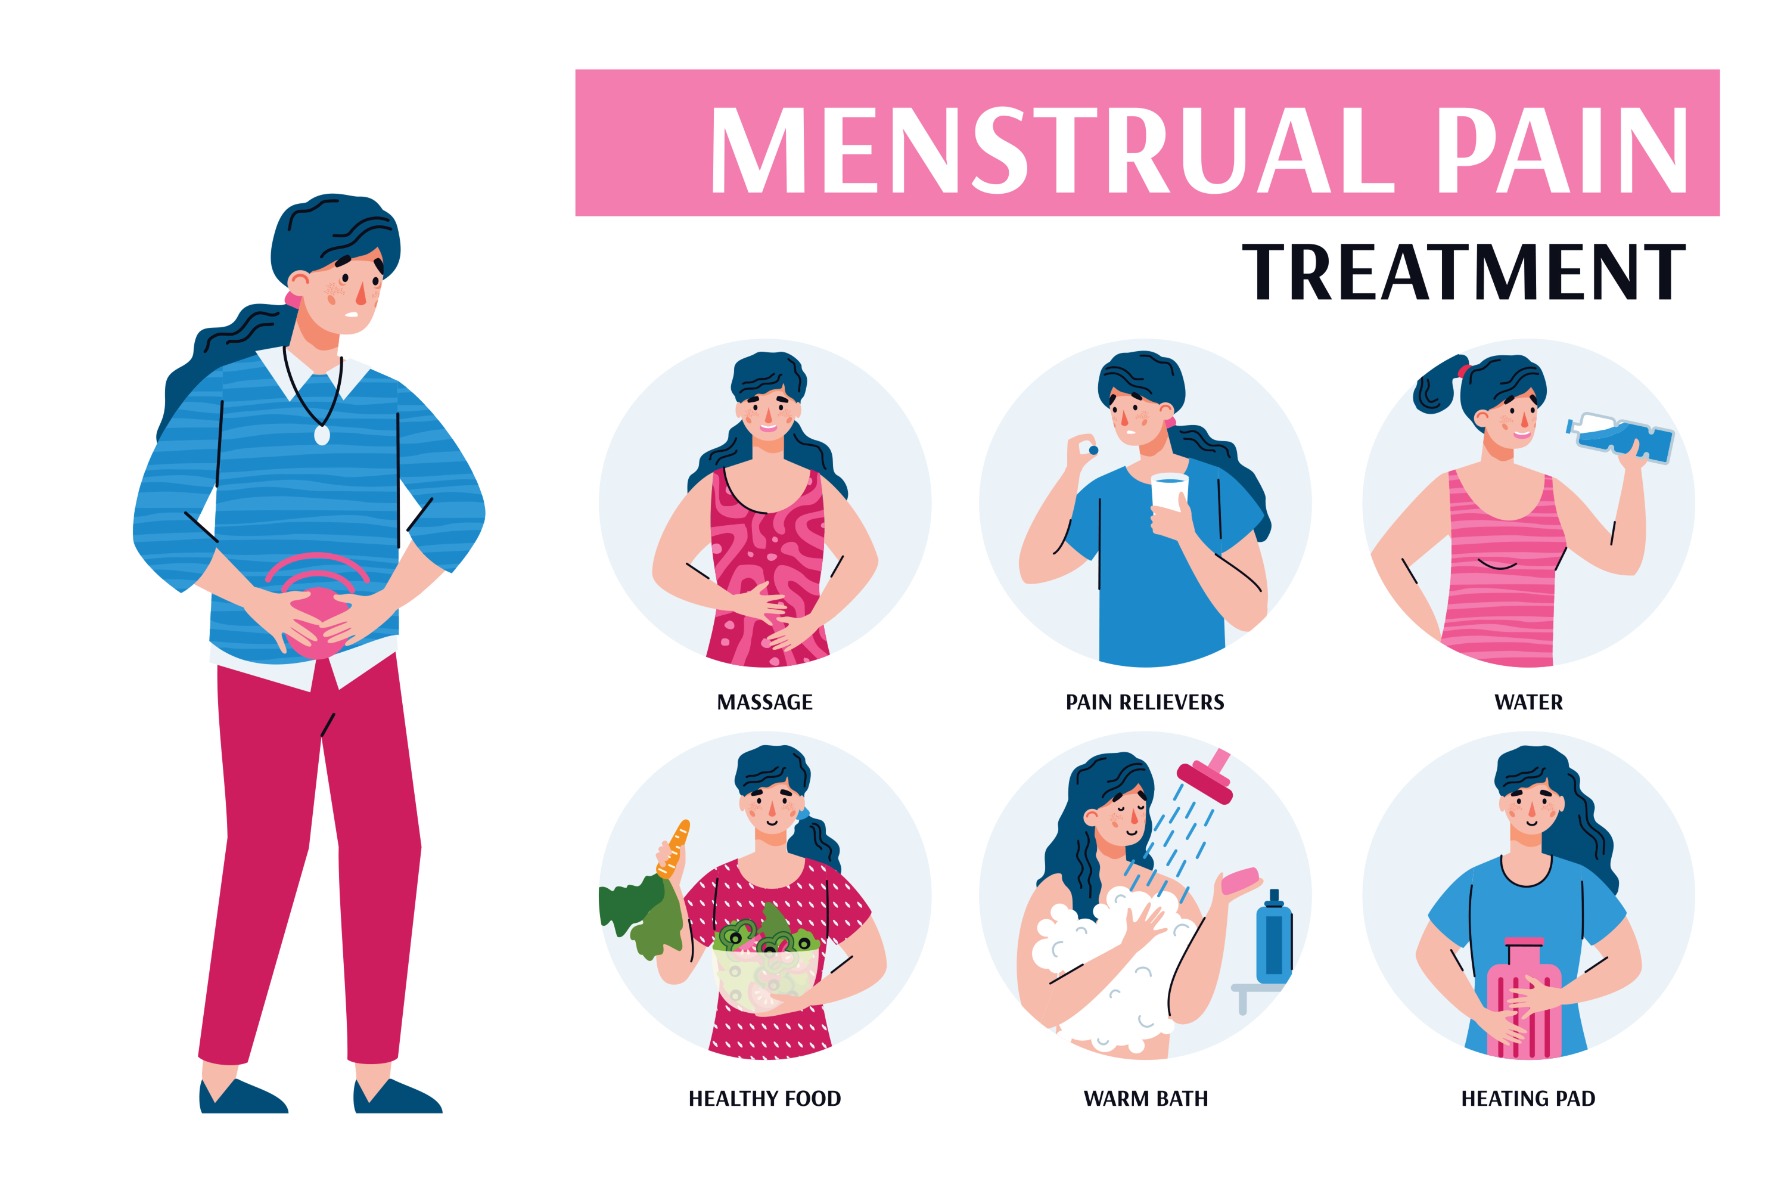 How To Deal With Pms Cramps - Relationclock27